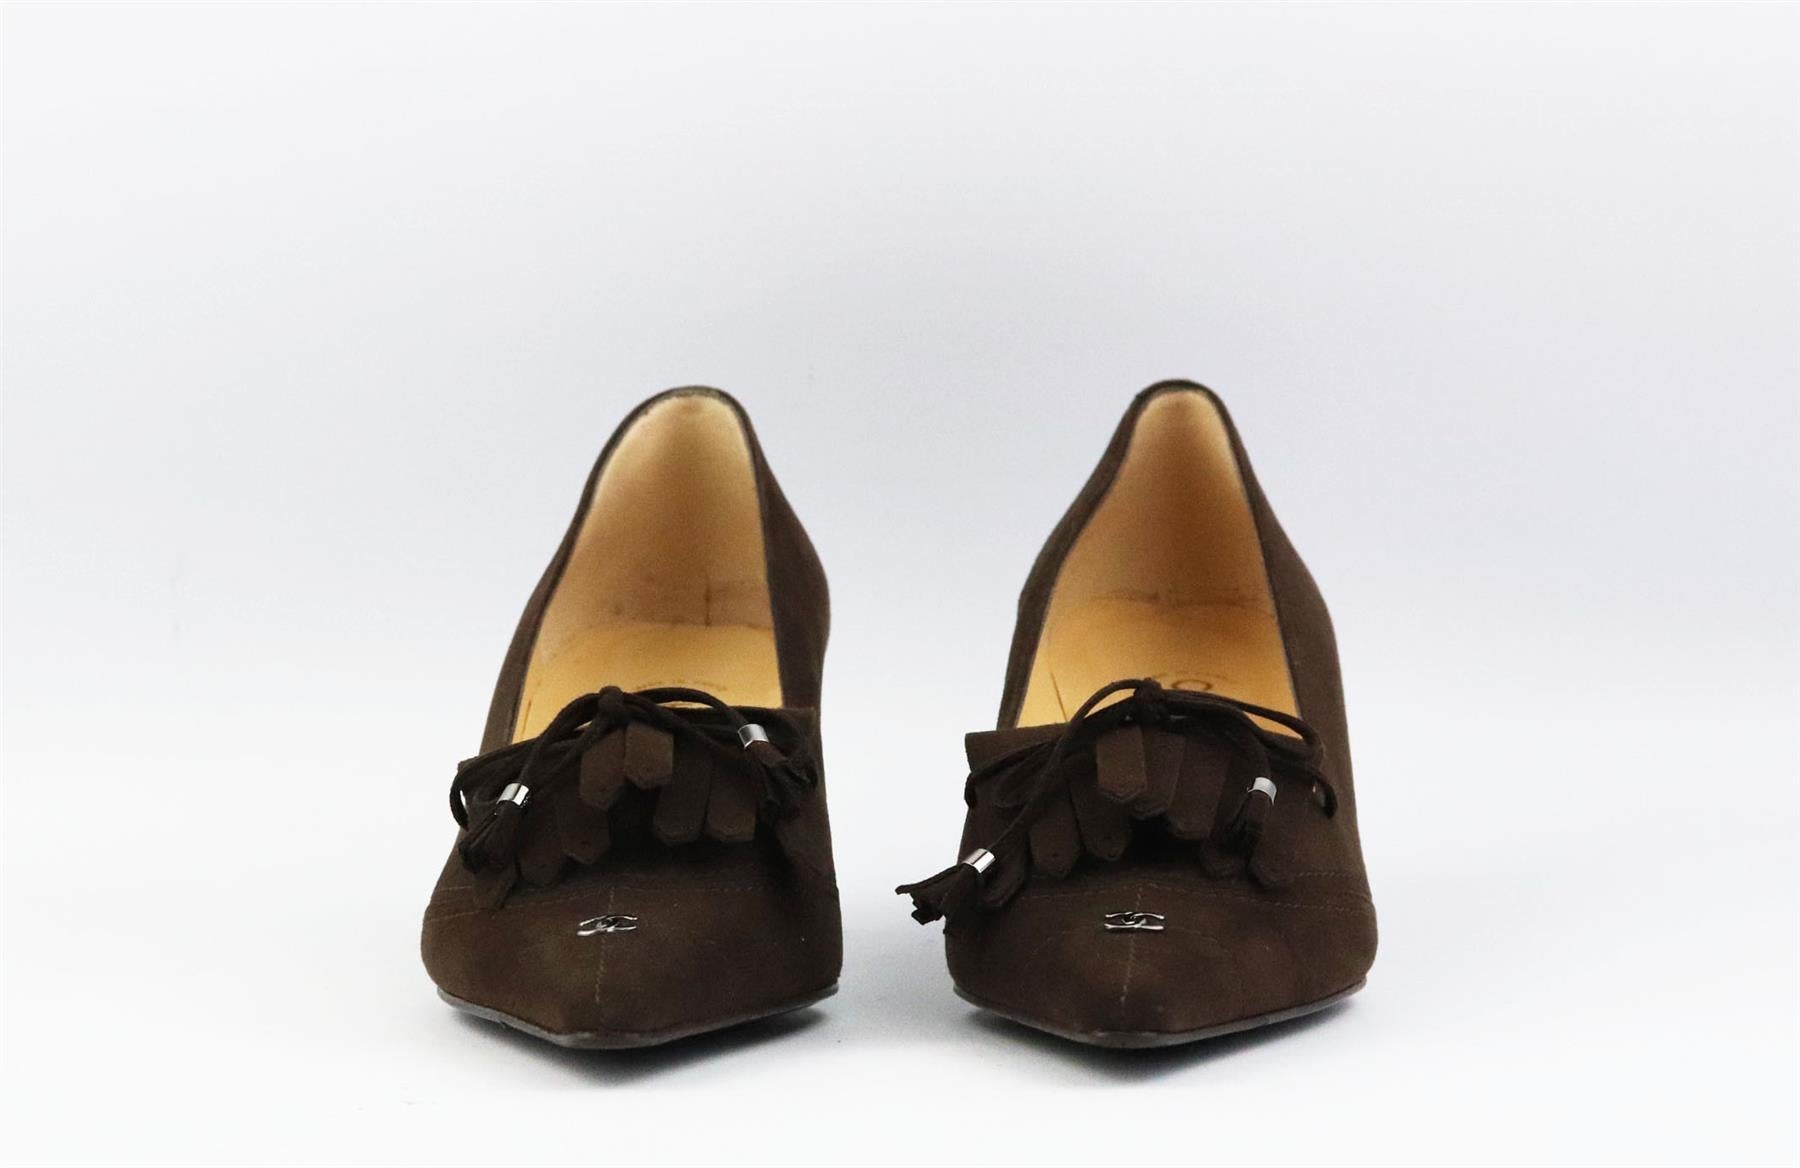 These vintage pumps by Chanel have been made in Italy from brown suede, they're set on a small structured wooden heel that's balanced with a pointed toe and CC tassel and fringe detail. Heel measures approximately 50 mm/ 2 inches. Brown suede. Slip